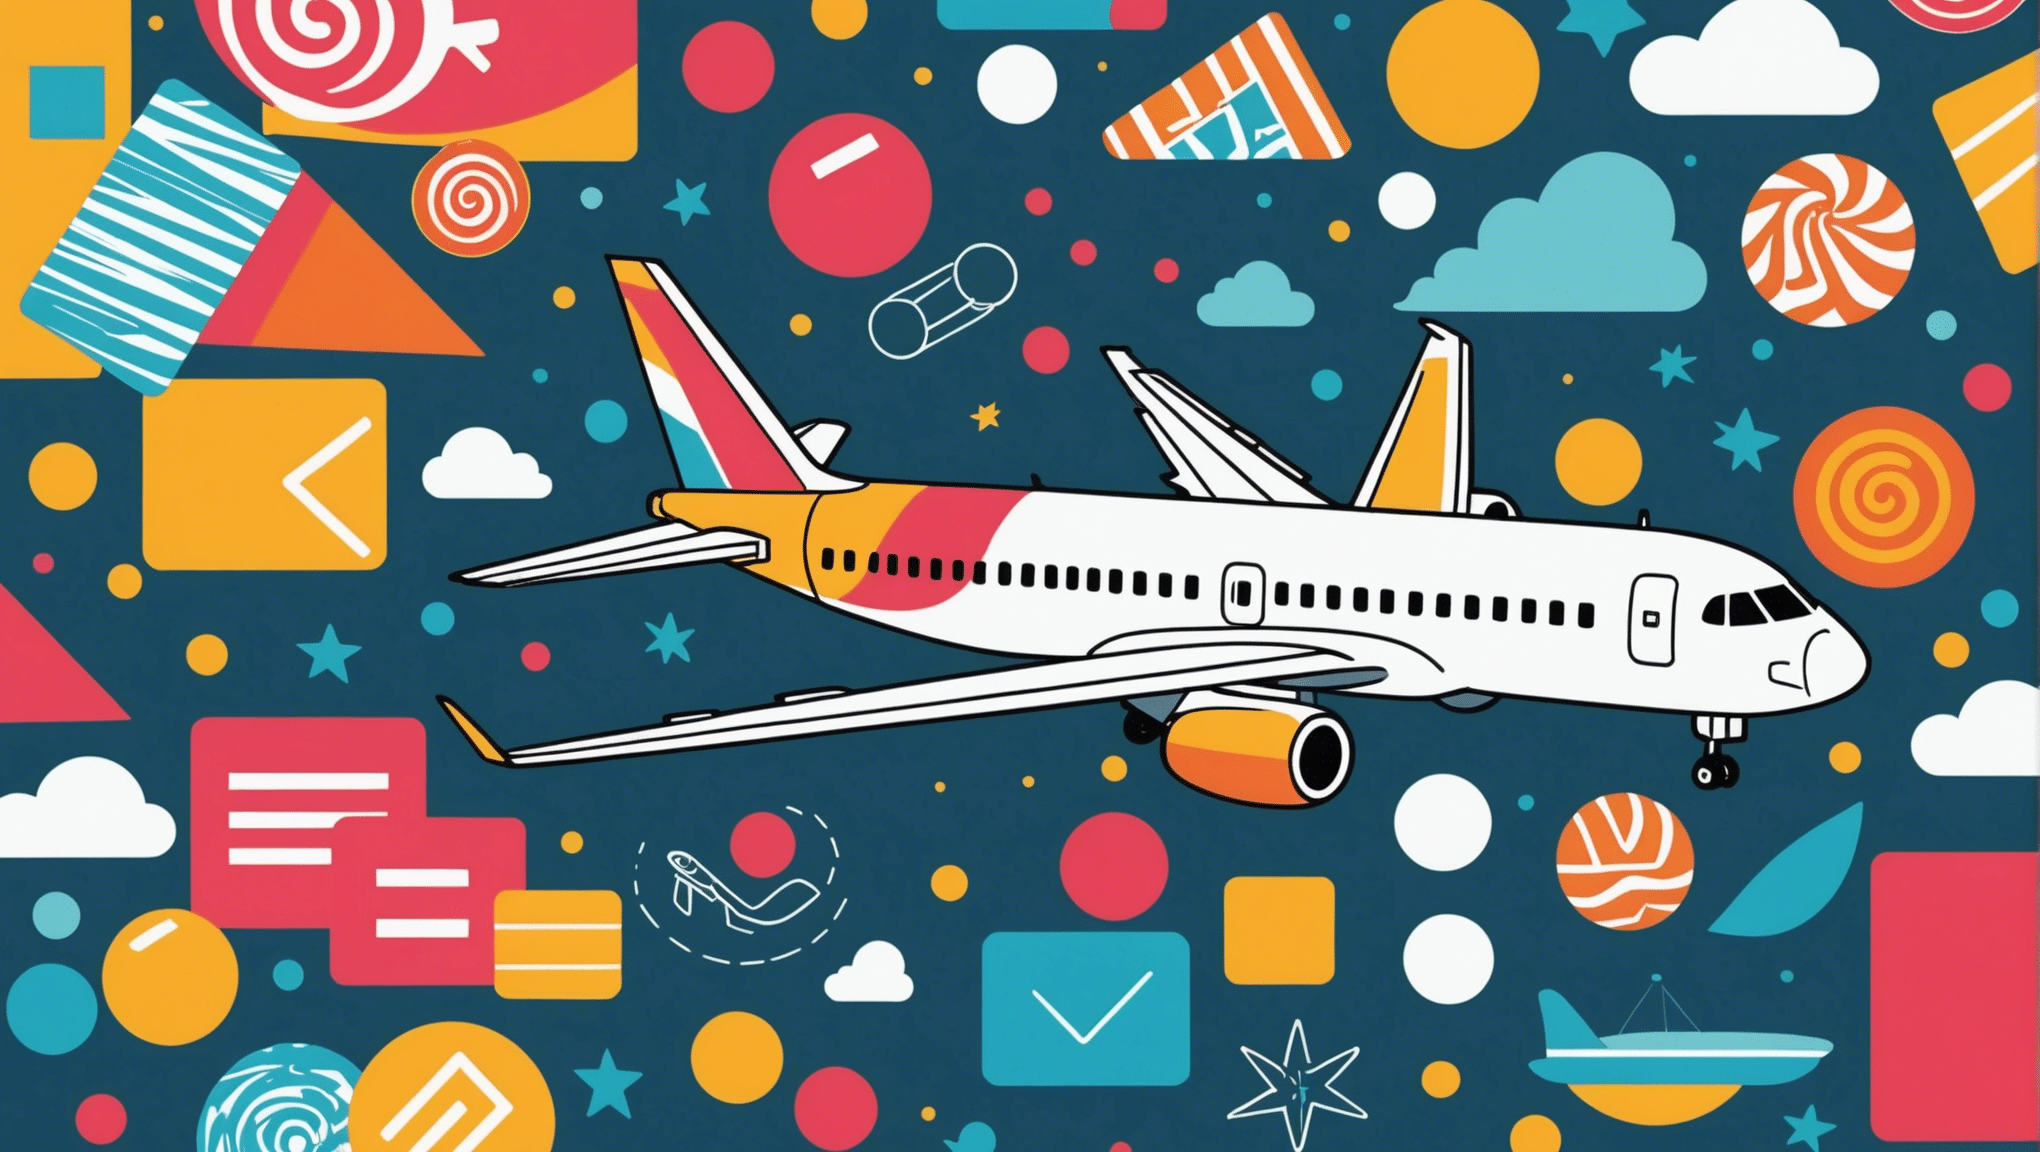 discover how to find the perfect time to buy a plane ticket and save on your next trips with our practical tips.